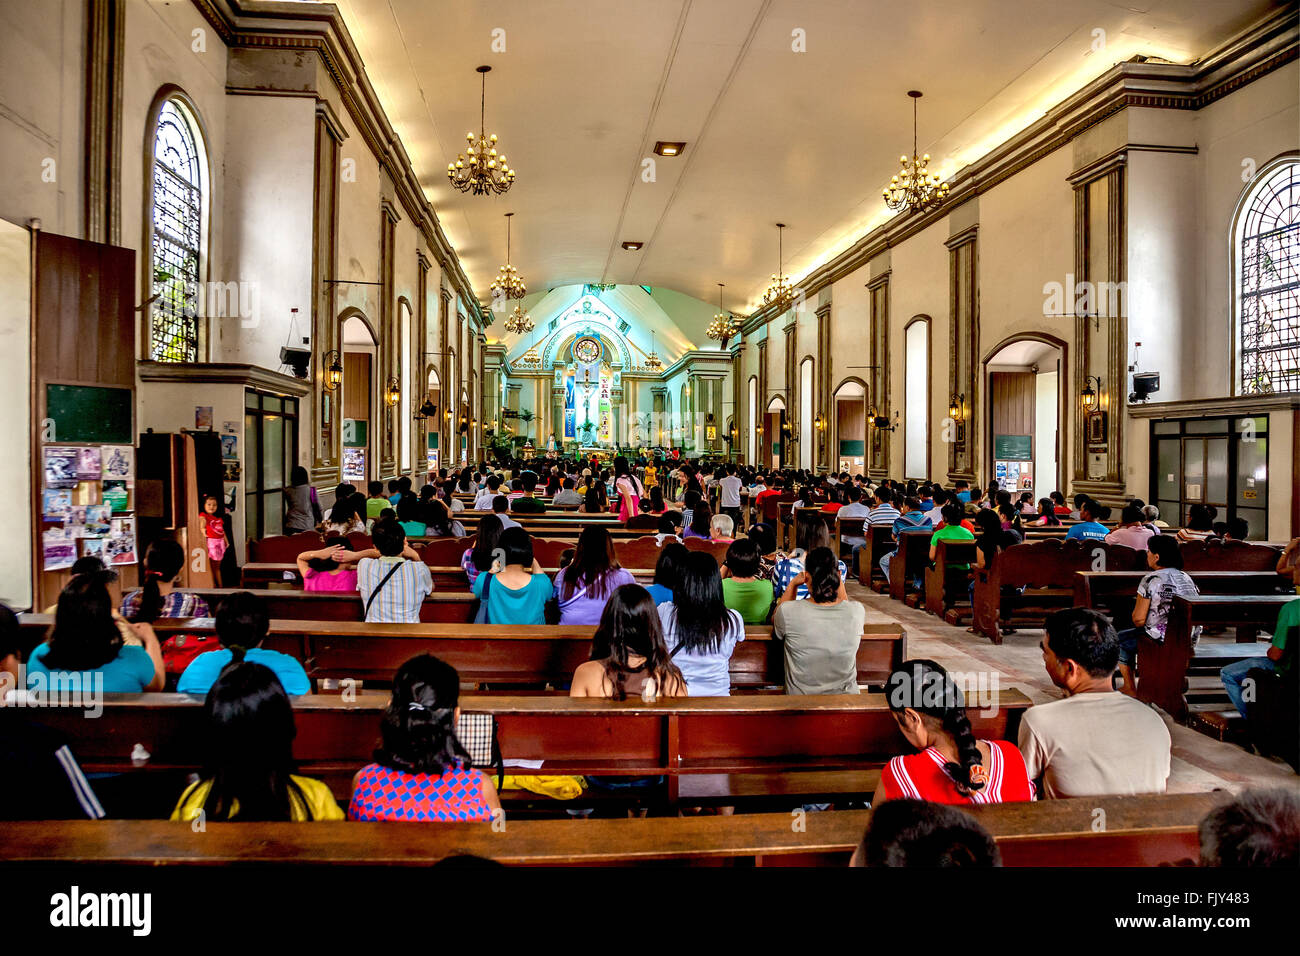 Philippines Negros Dumaguete Dumaguete cathedral  Adrian Baker Stock Photo